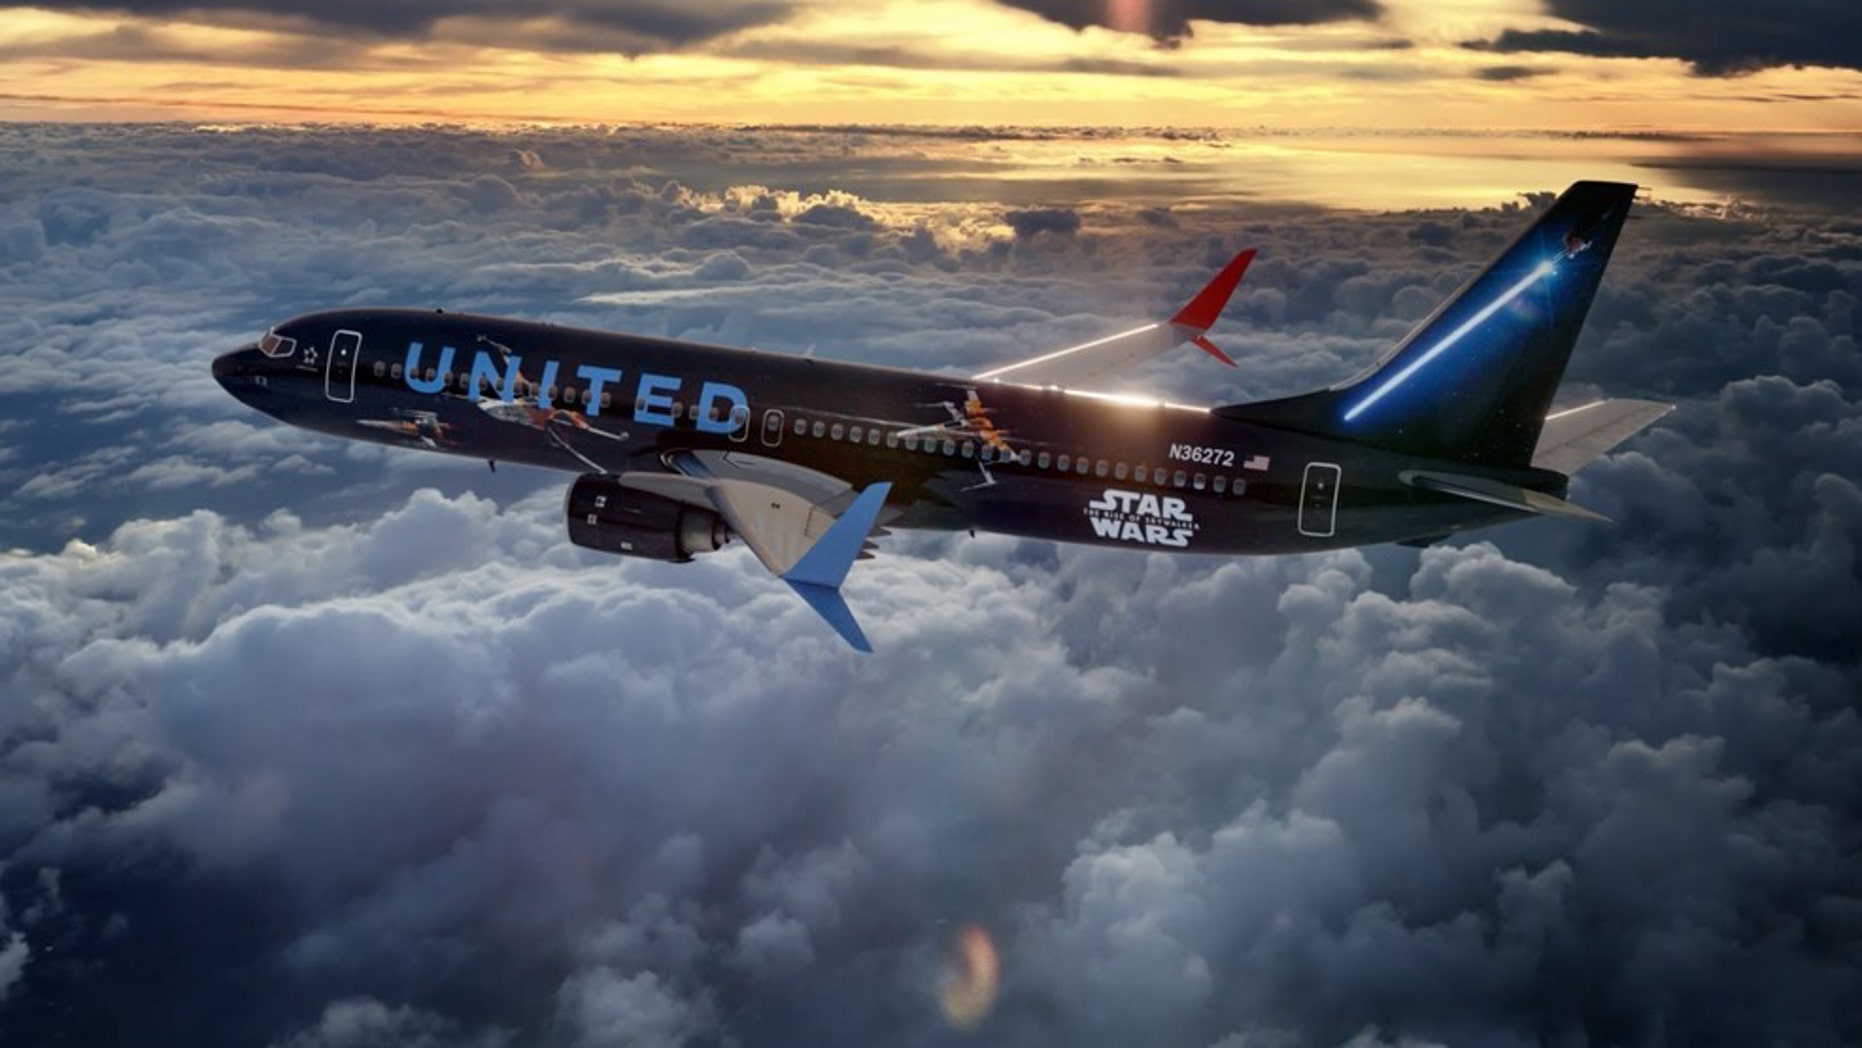 United Airlines is unveiling Star Wars-themed aircraft in November for the release of 